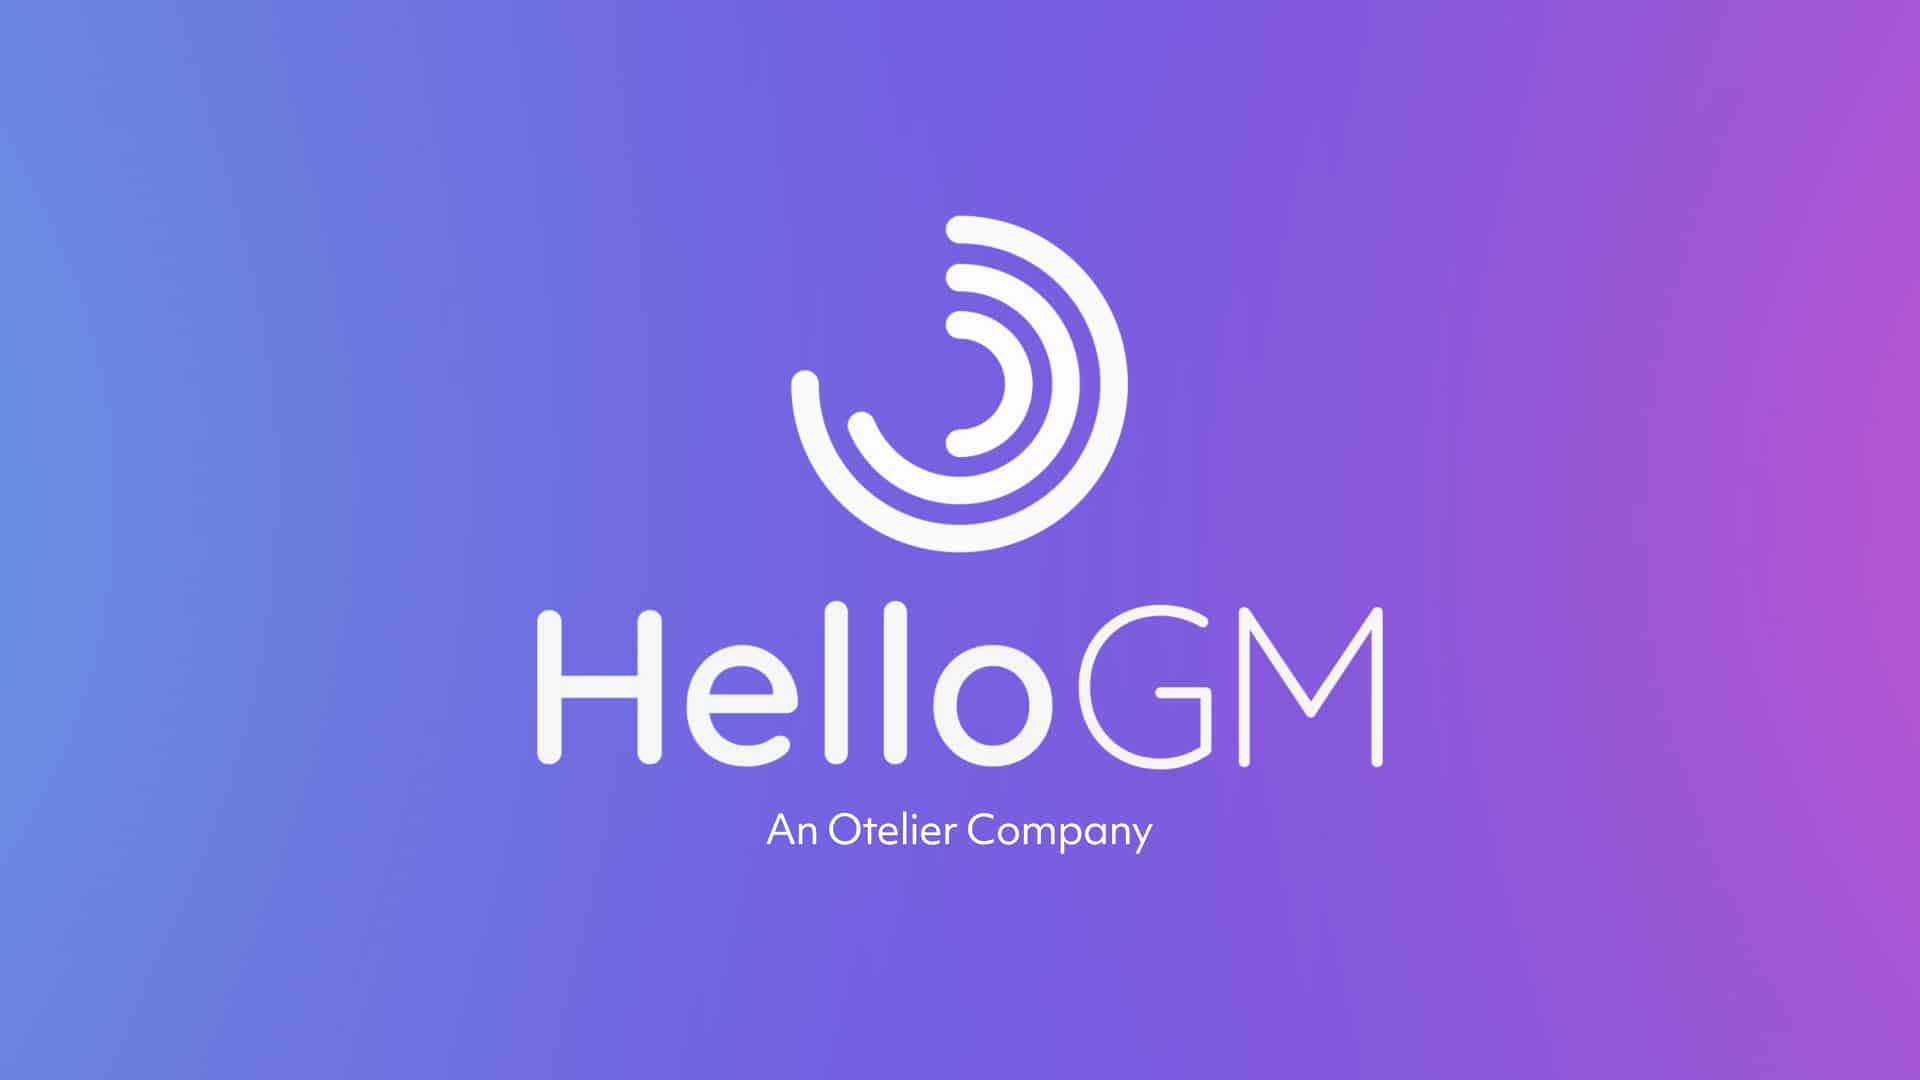 HelloGM is now part of Otelier